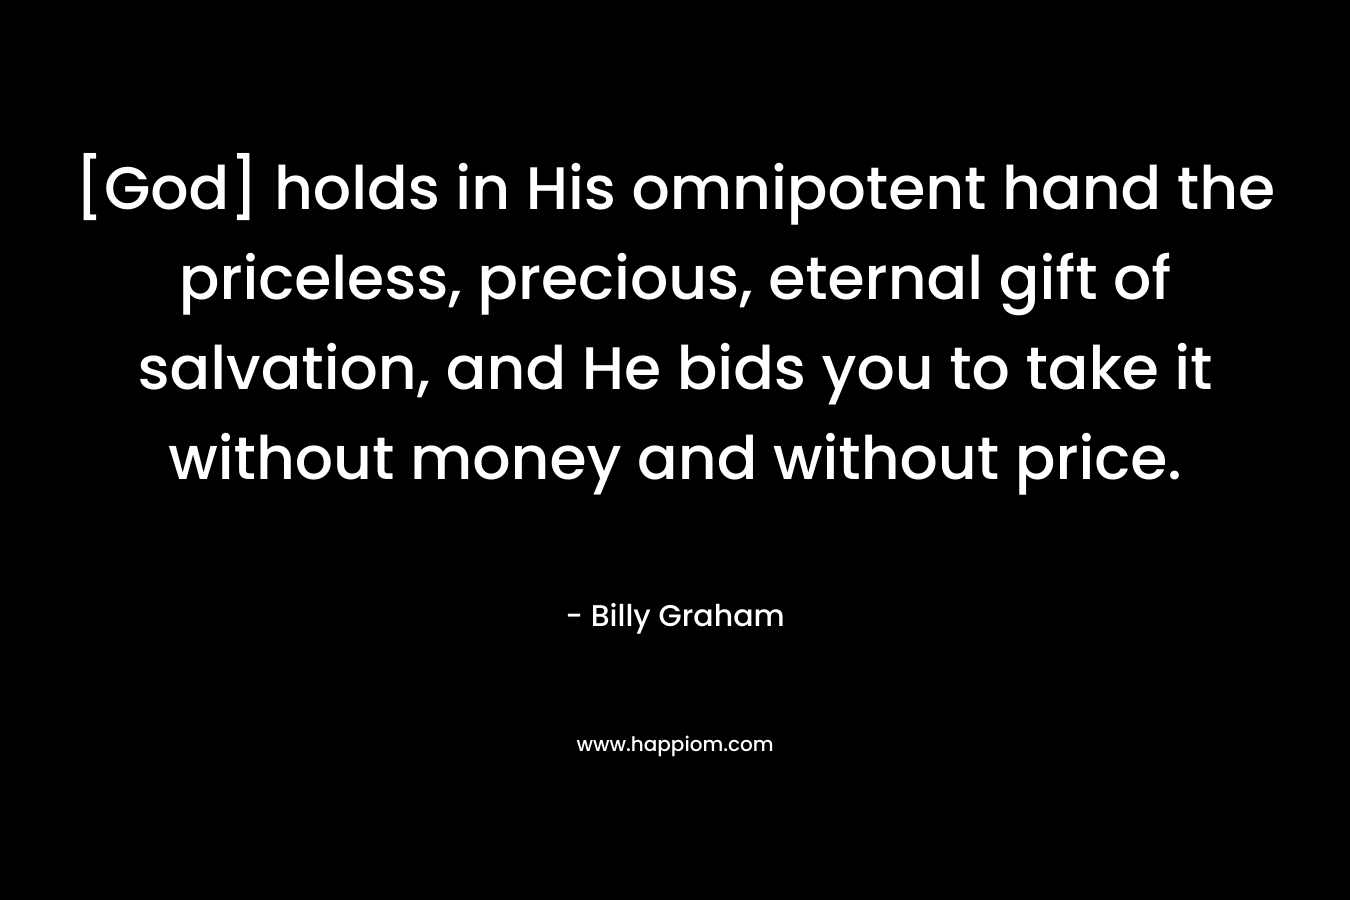 [God] holds in His omnipotent hand the priceless, precious, eternal gift of salvation, and He bids you to take it without money and without price. – Billy Graham